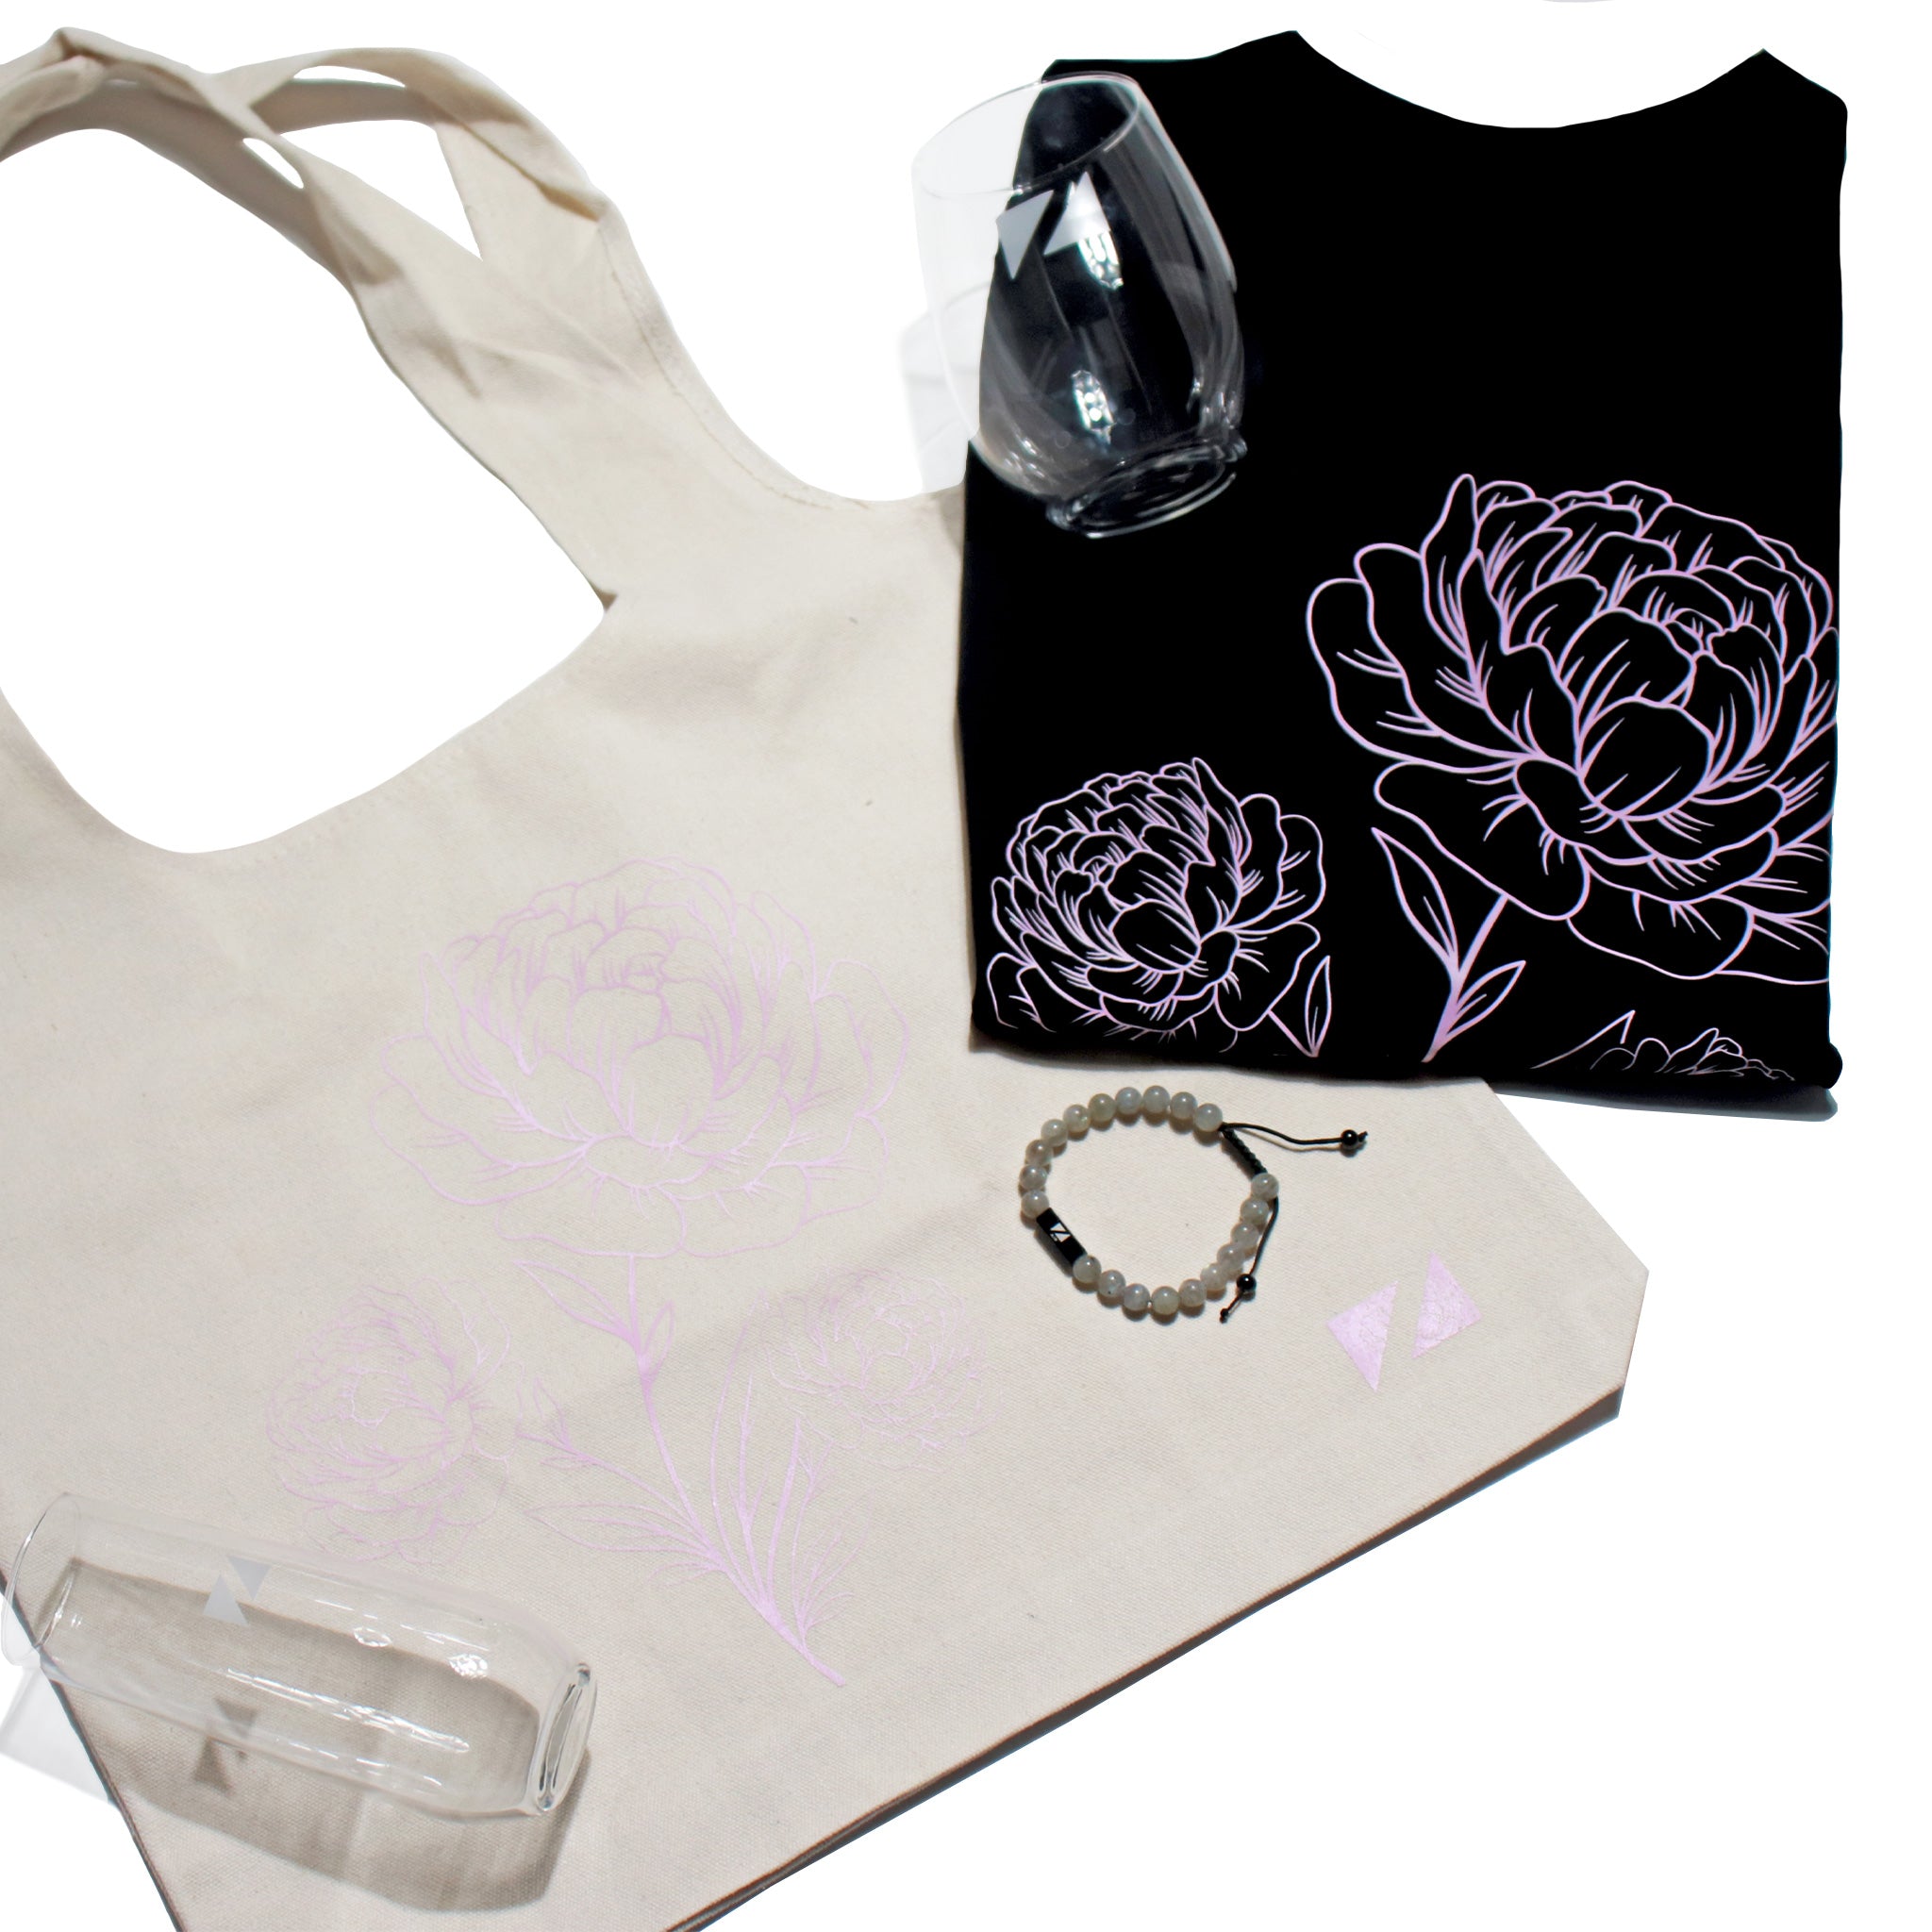 Bundle 1: The Luxe Carnation Tee + The Carnation Tote + Unwine Stemless Glass and Flute Bundle + Zueike Elements Bracelet